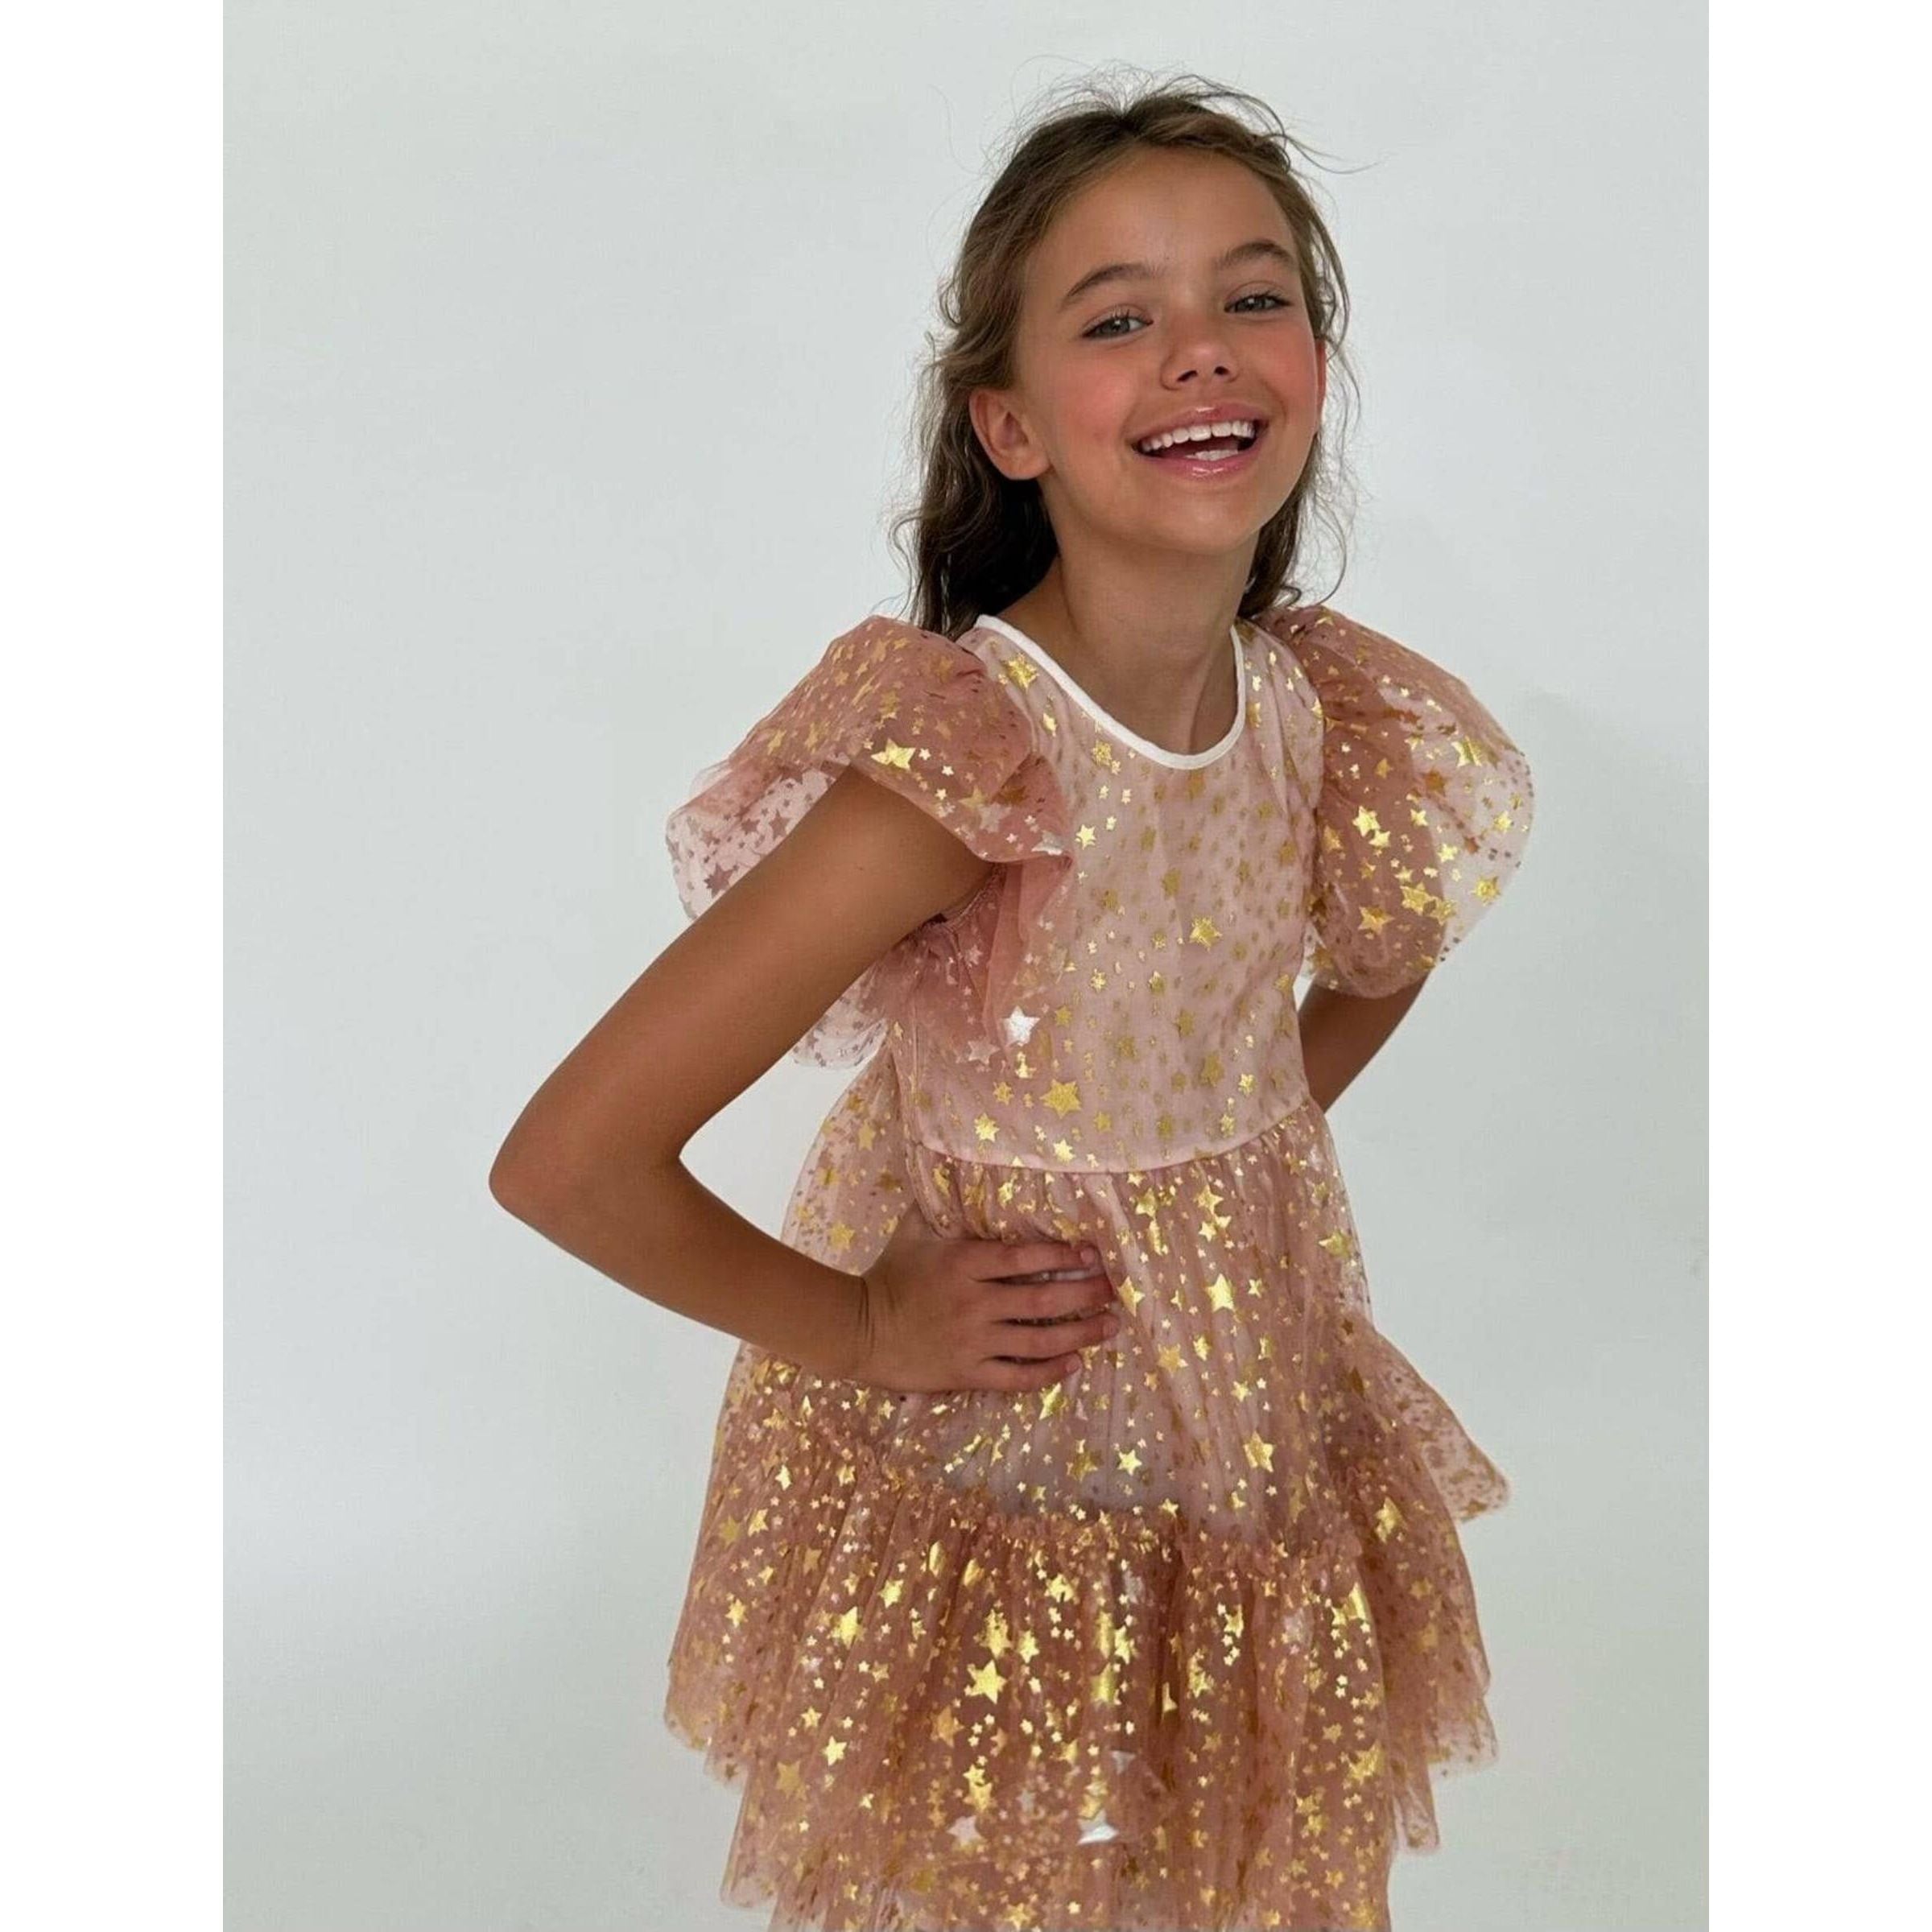 girl wearing. blush colored tulle dress covered in gold metallic stars